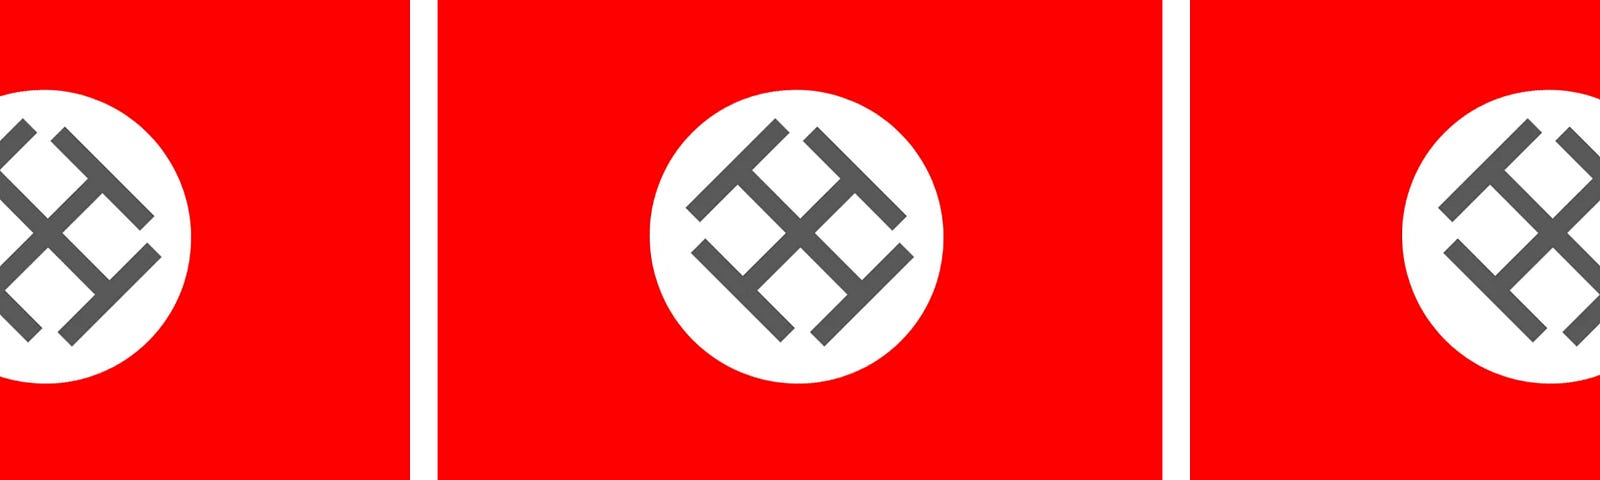 Three Pseudo-Nazi flags with the letter “T”